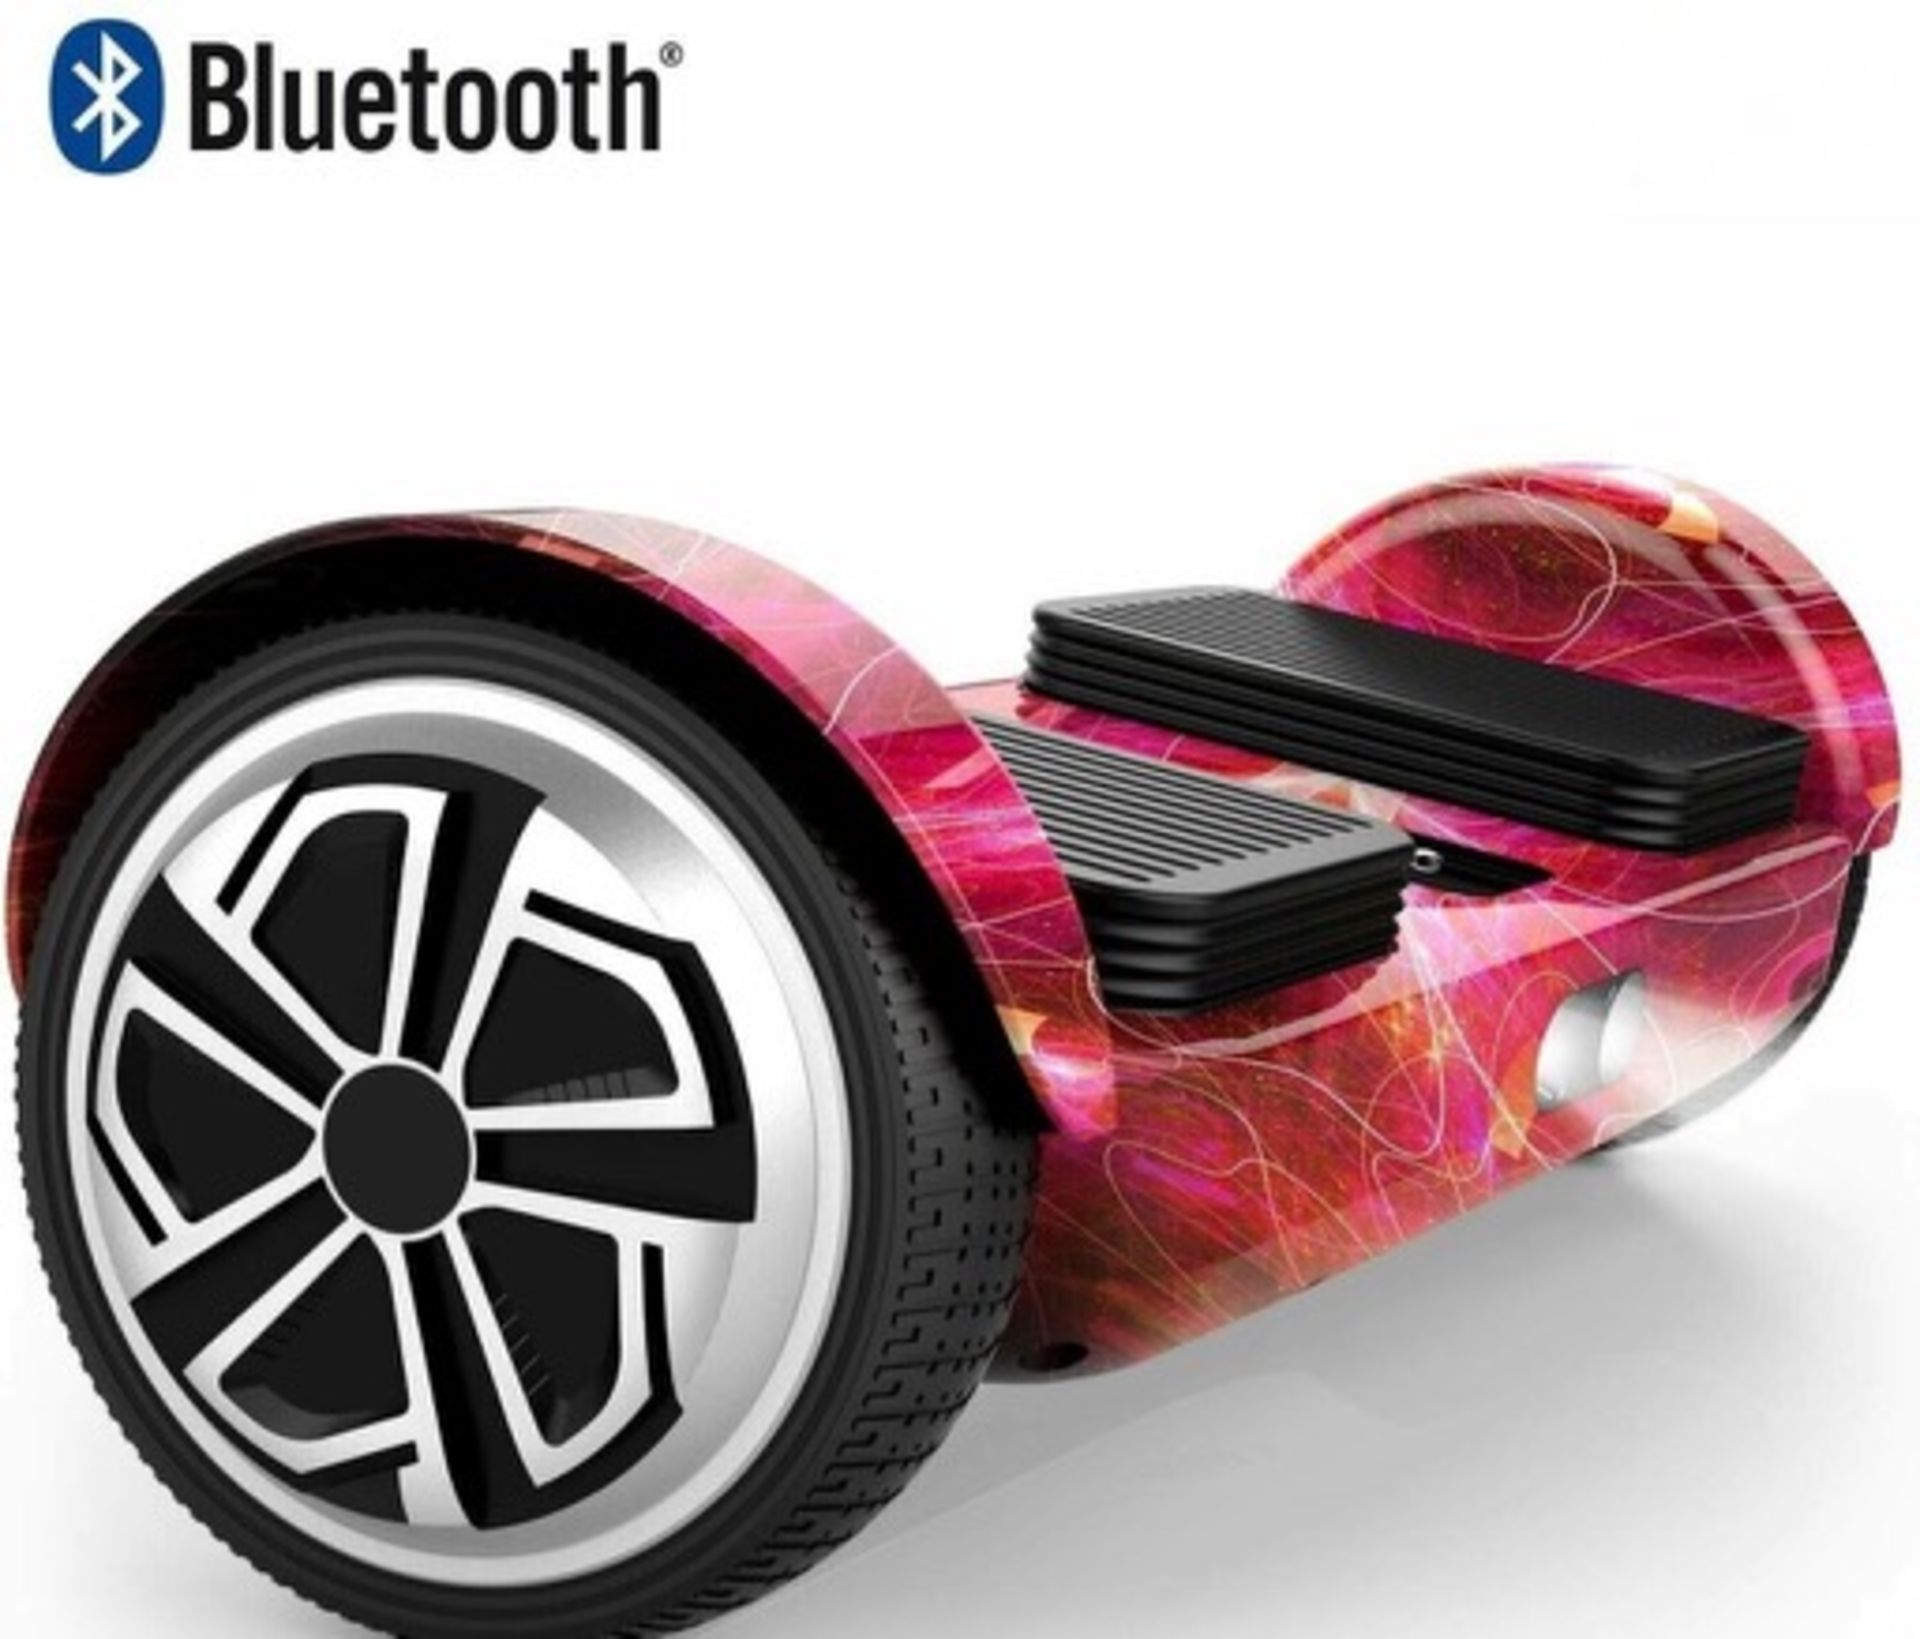 5 x Oxa Balancing Scooter Hover Boards With Built-In Bluetooth Speaker. RRP £249.99 Each.